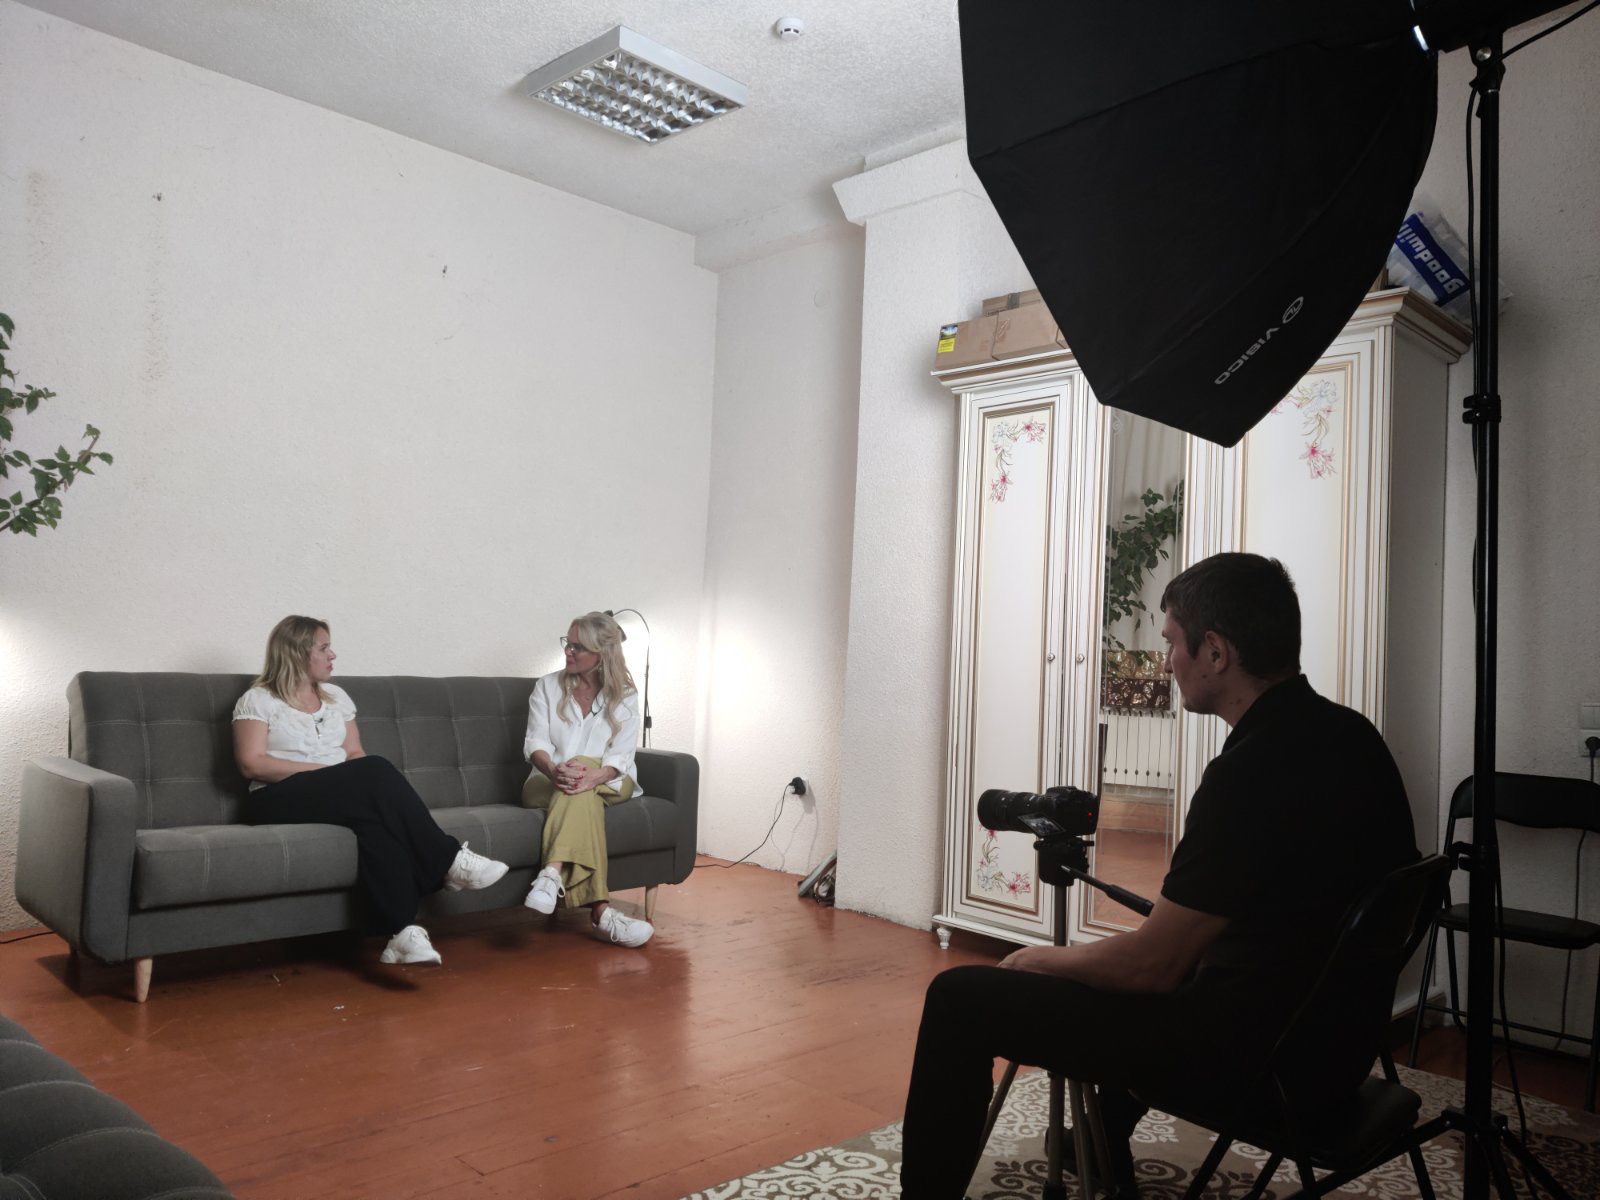 Two people sitting on a couch in a room with a camera.